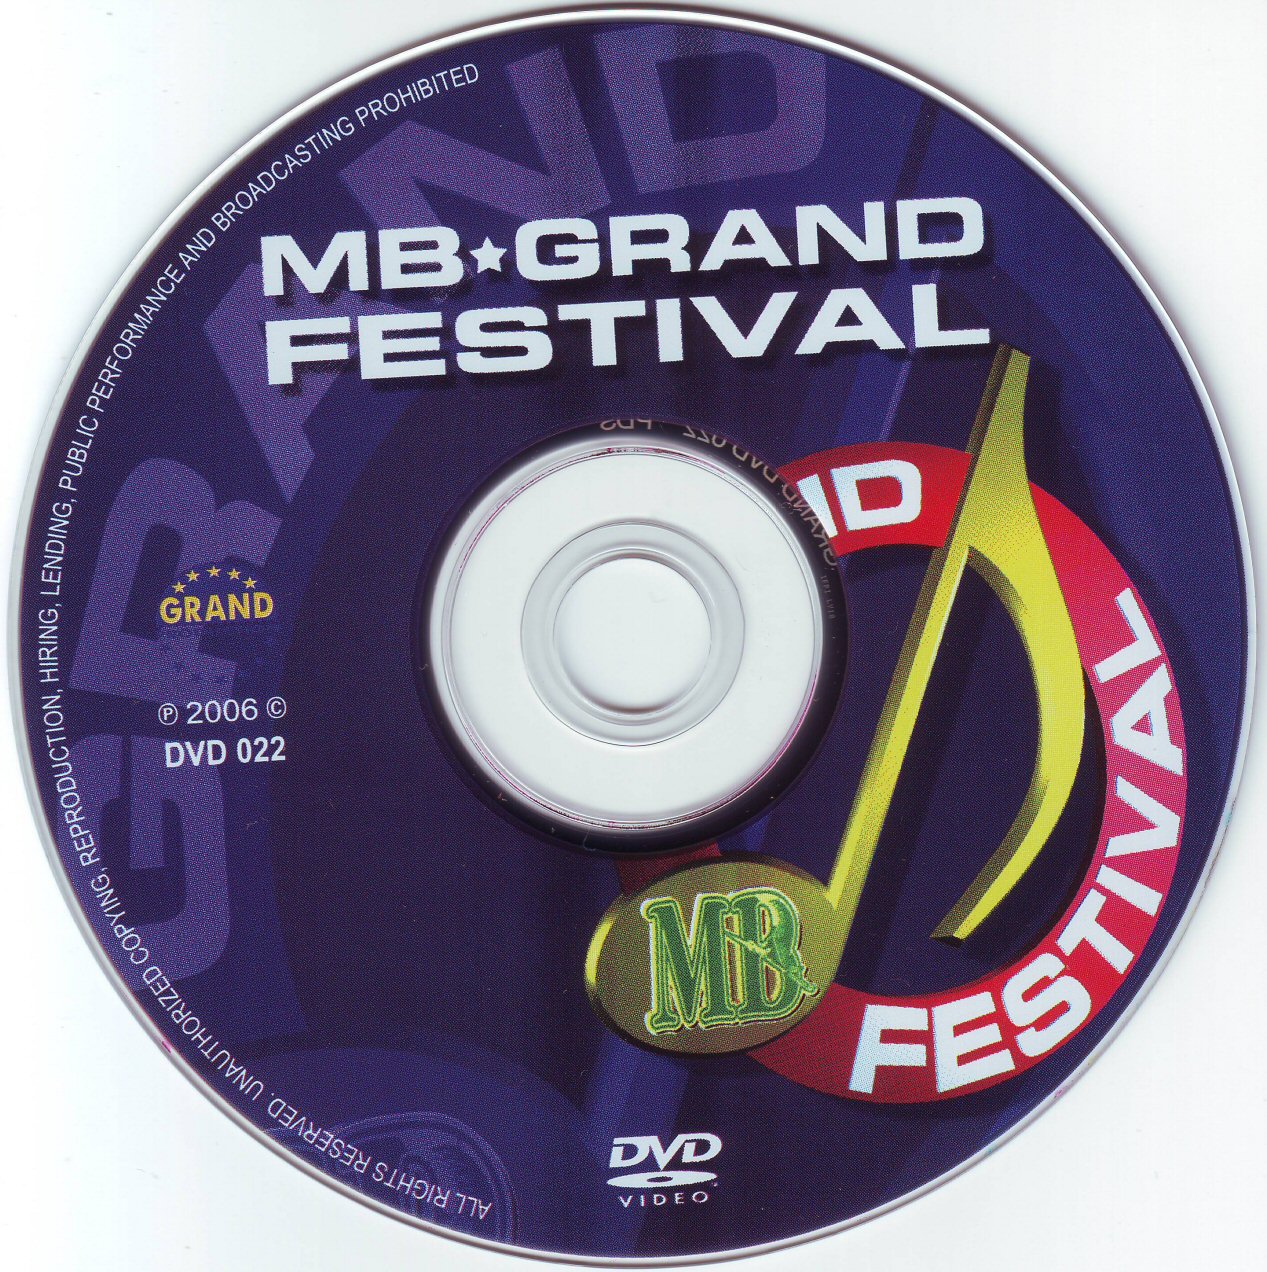 Click to view full size image -  DVD Cover - M - DVD - MB GRAND FESTIVAL - CD - DVD - MB GRAND FESTIVAL - CD.jpg